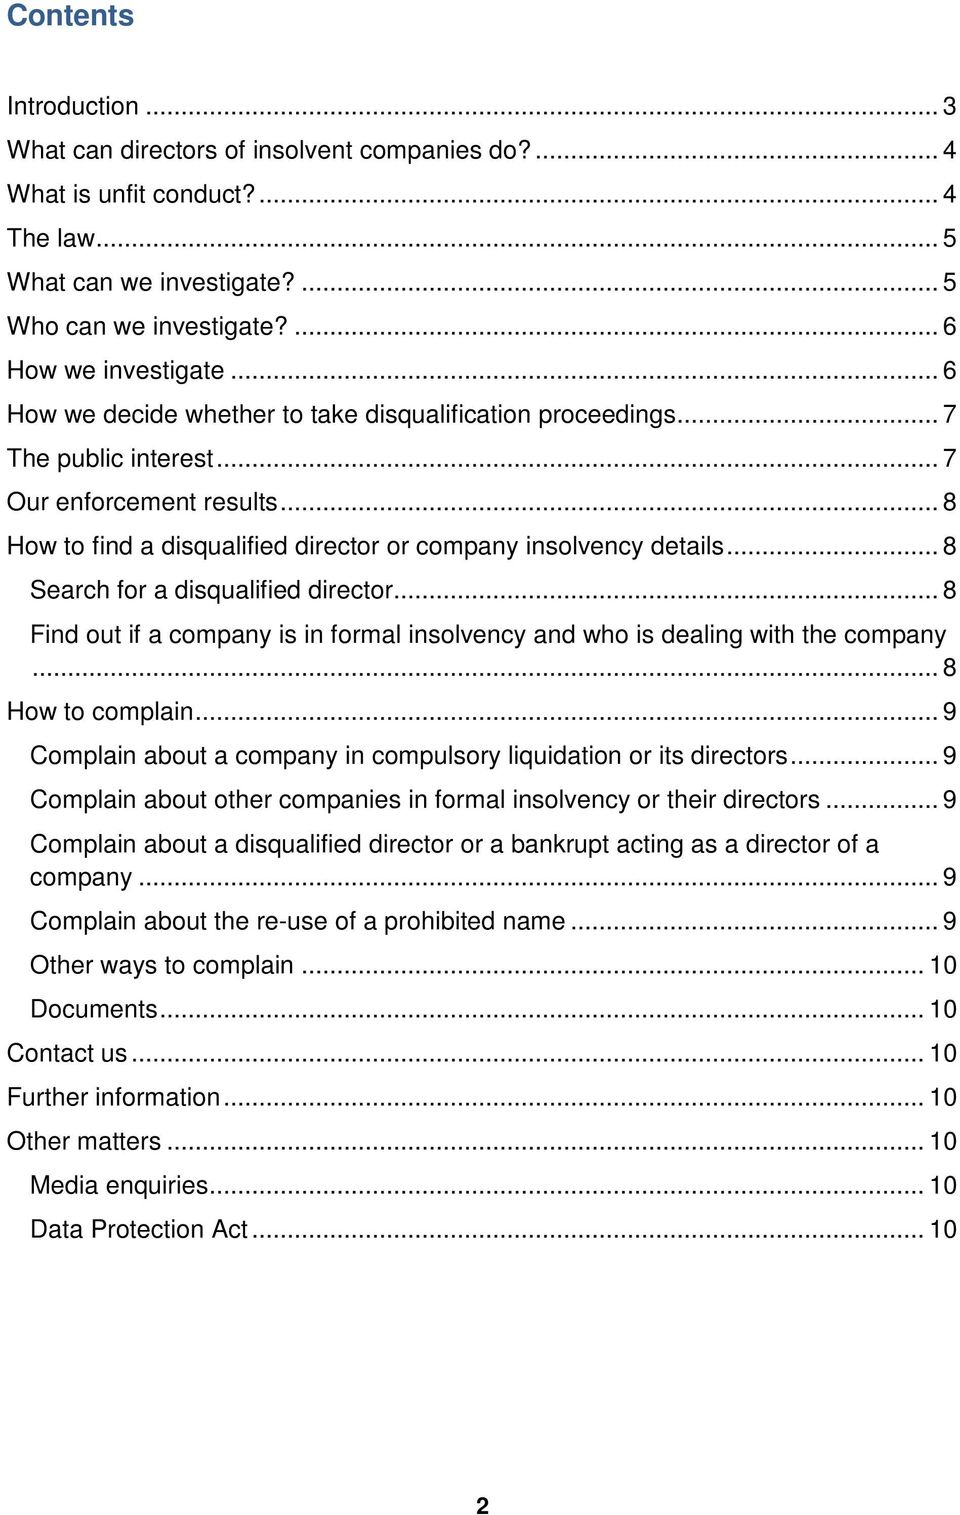 .. 8 Search for a disqualified director... 8 Find out if a company is in formal insolvency and who is dealing with the company... 8 How to complain.